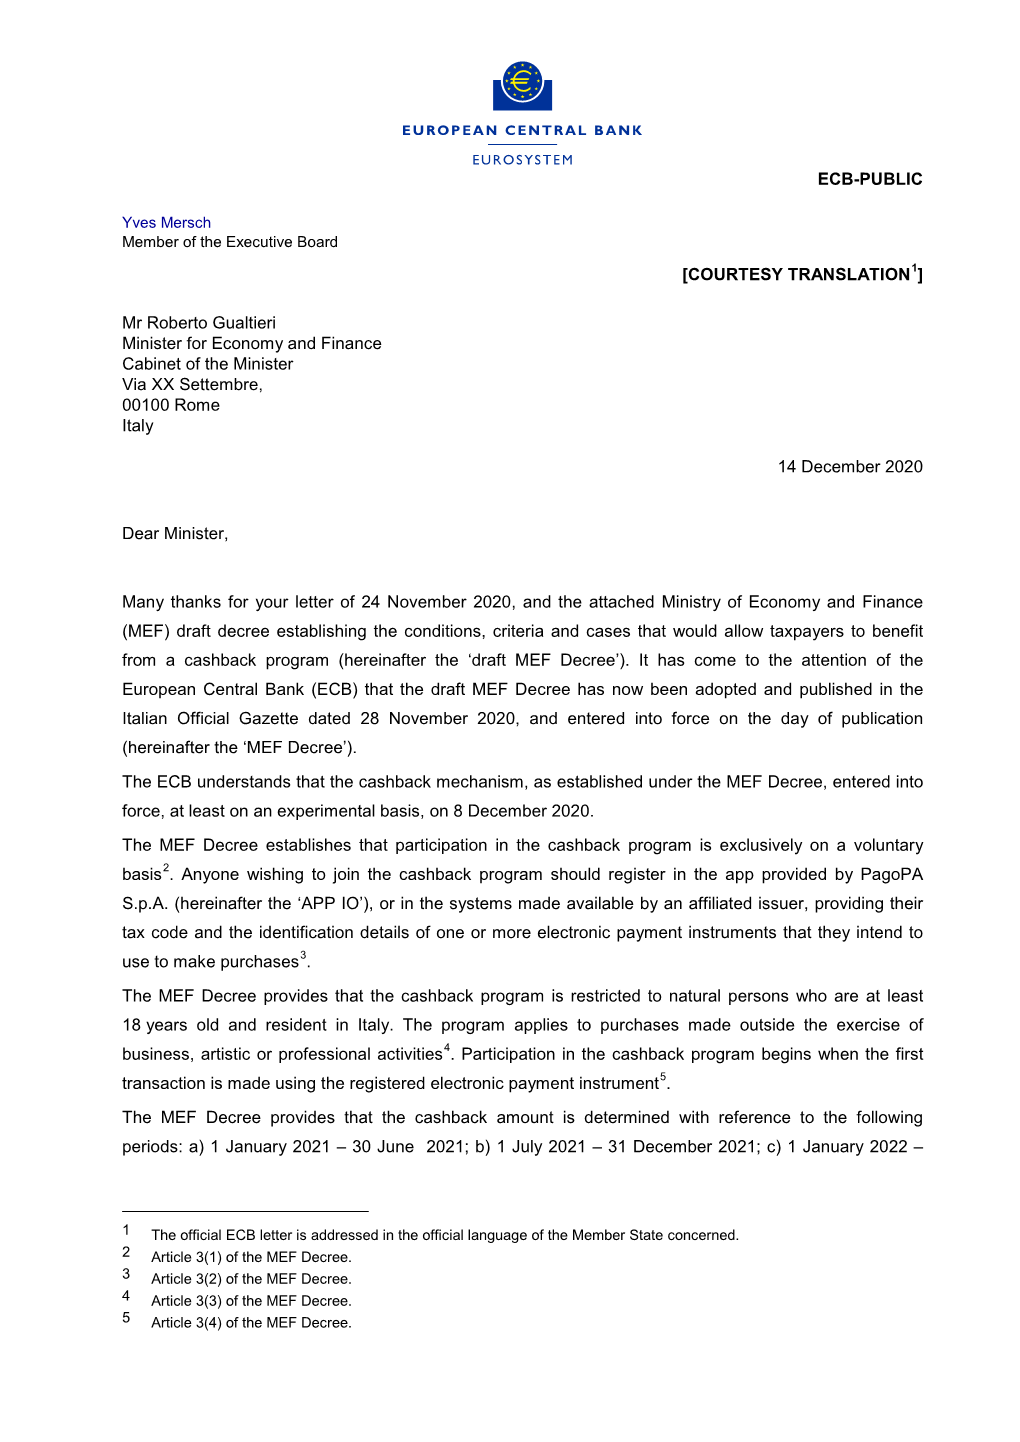 Letter from Yves Mersch, Member of the Executive Board of The